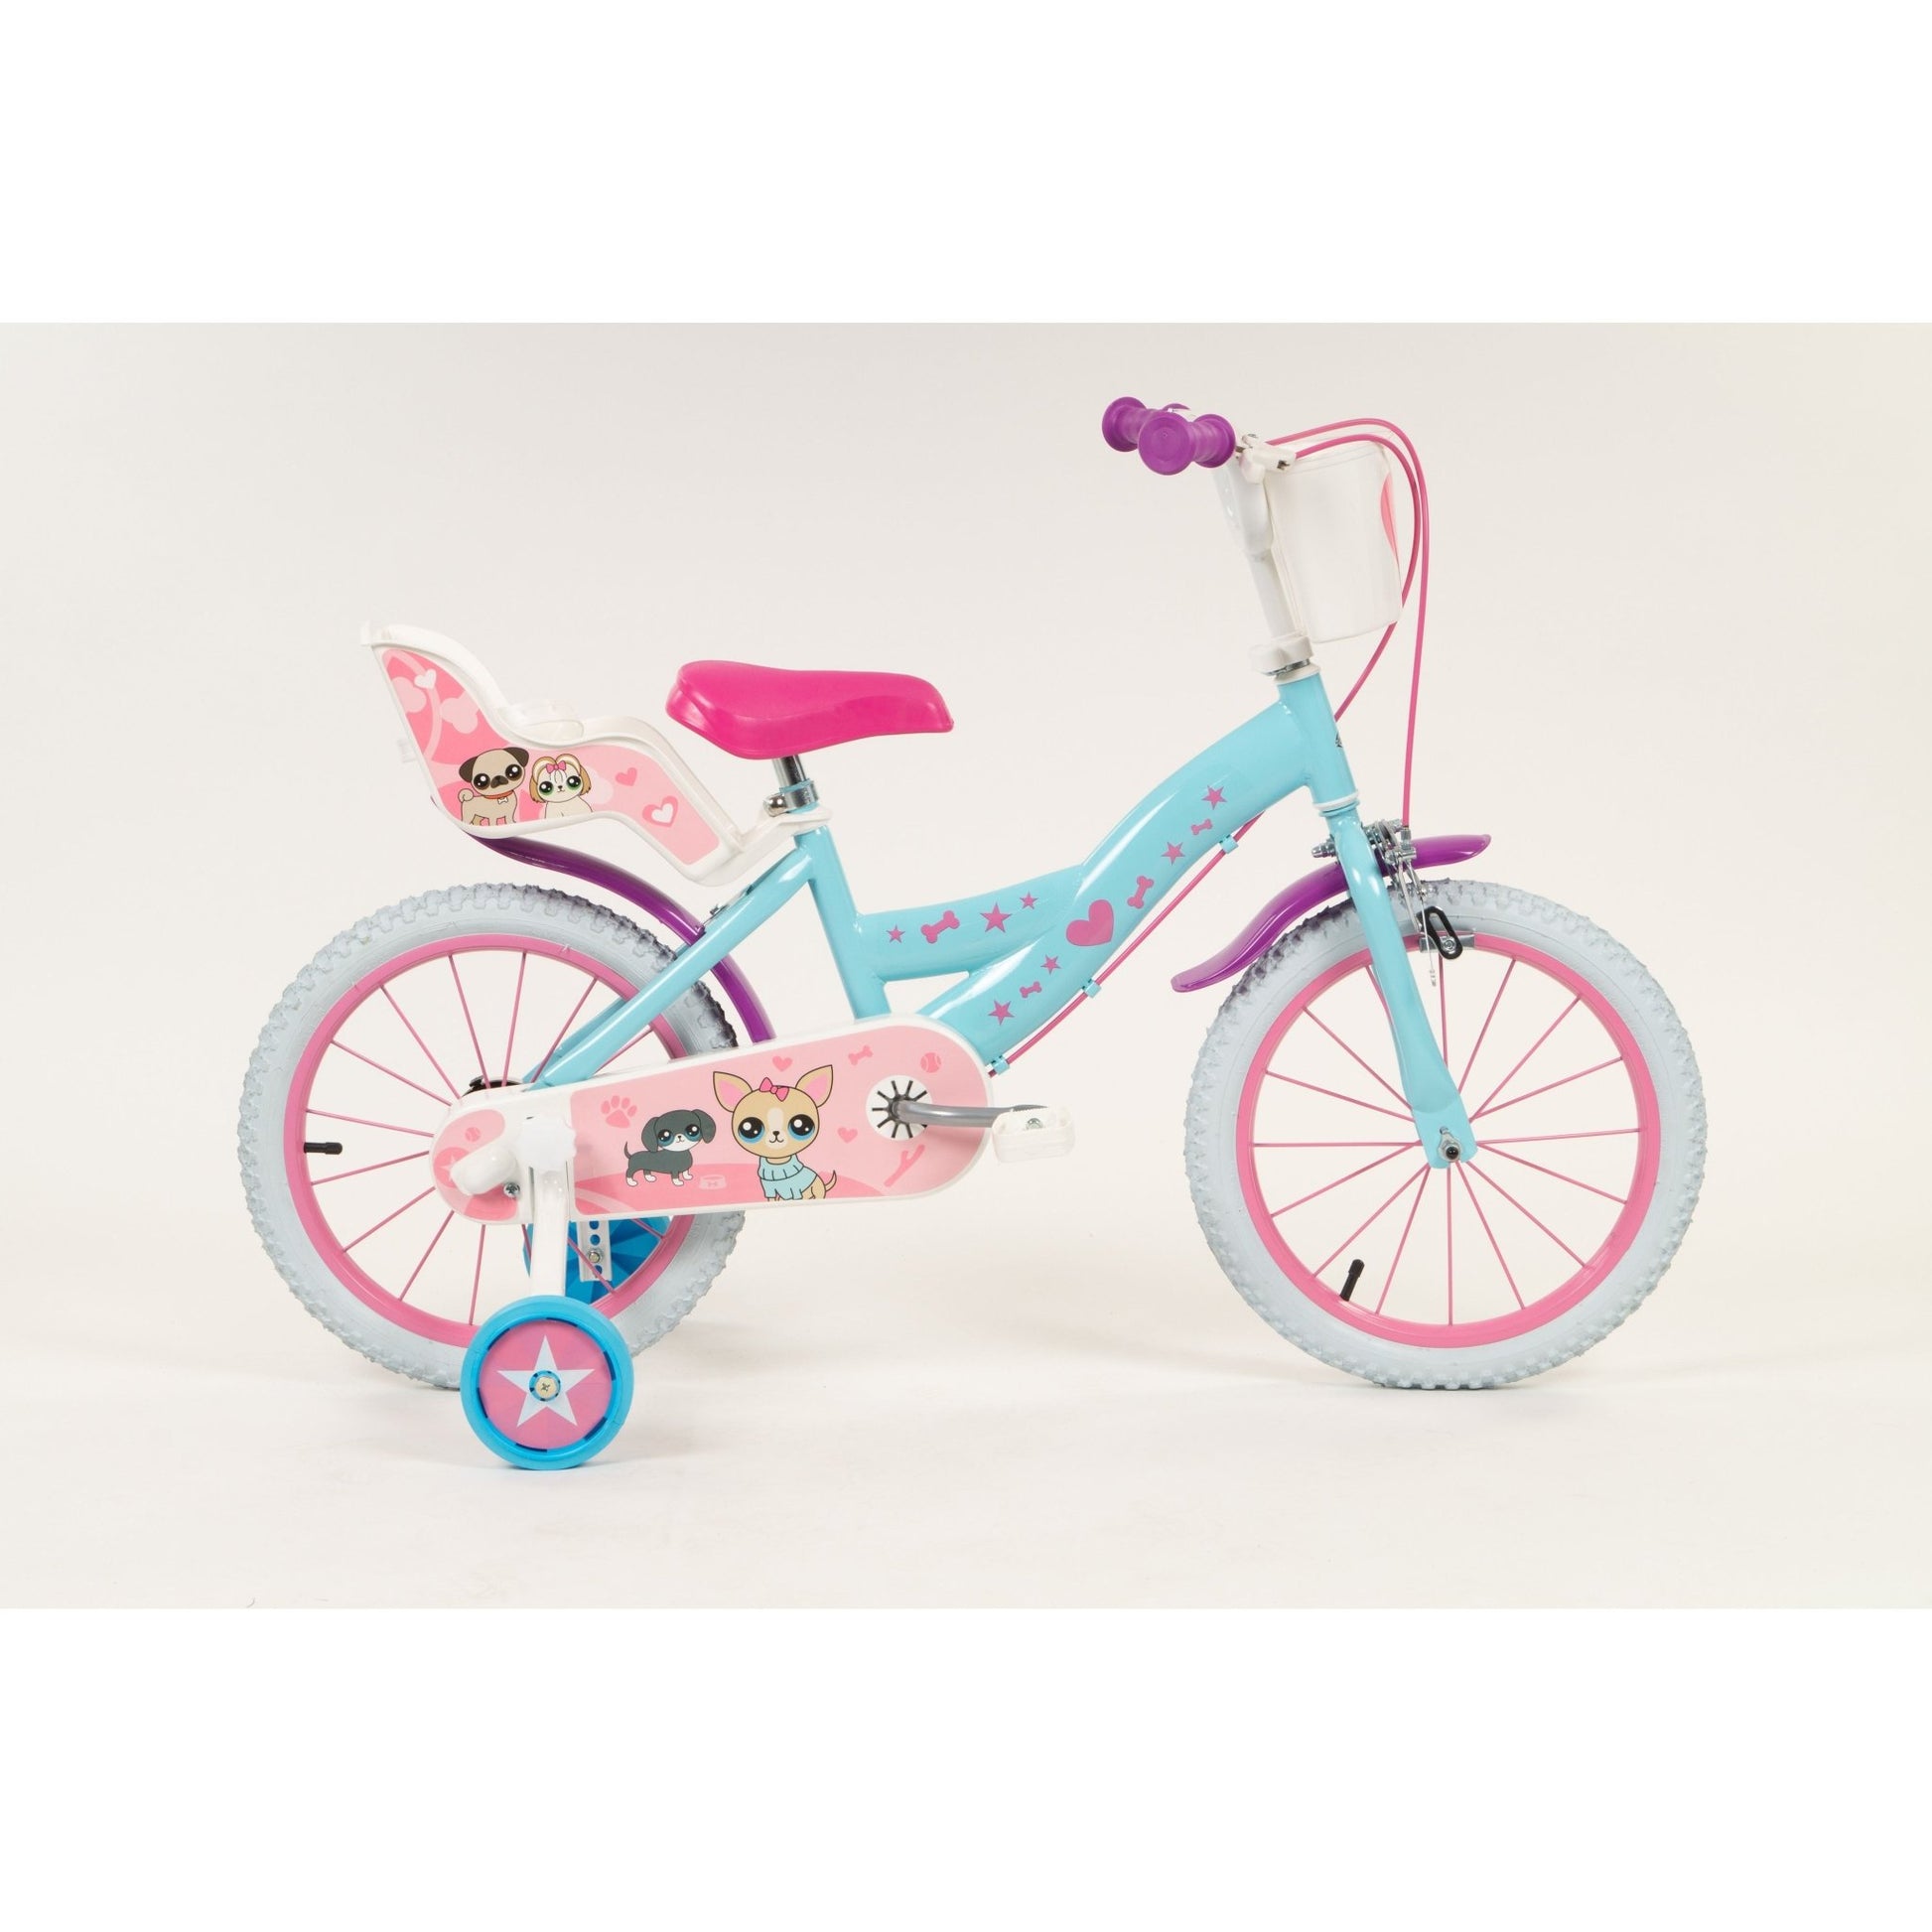 Pets Childrens Bicycle - Available in 3 Sizes - The Online Toy Shop - Bicycle - 10